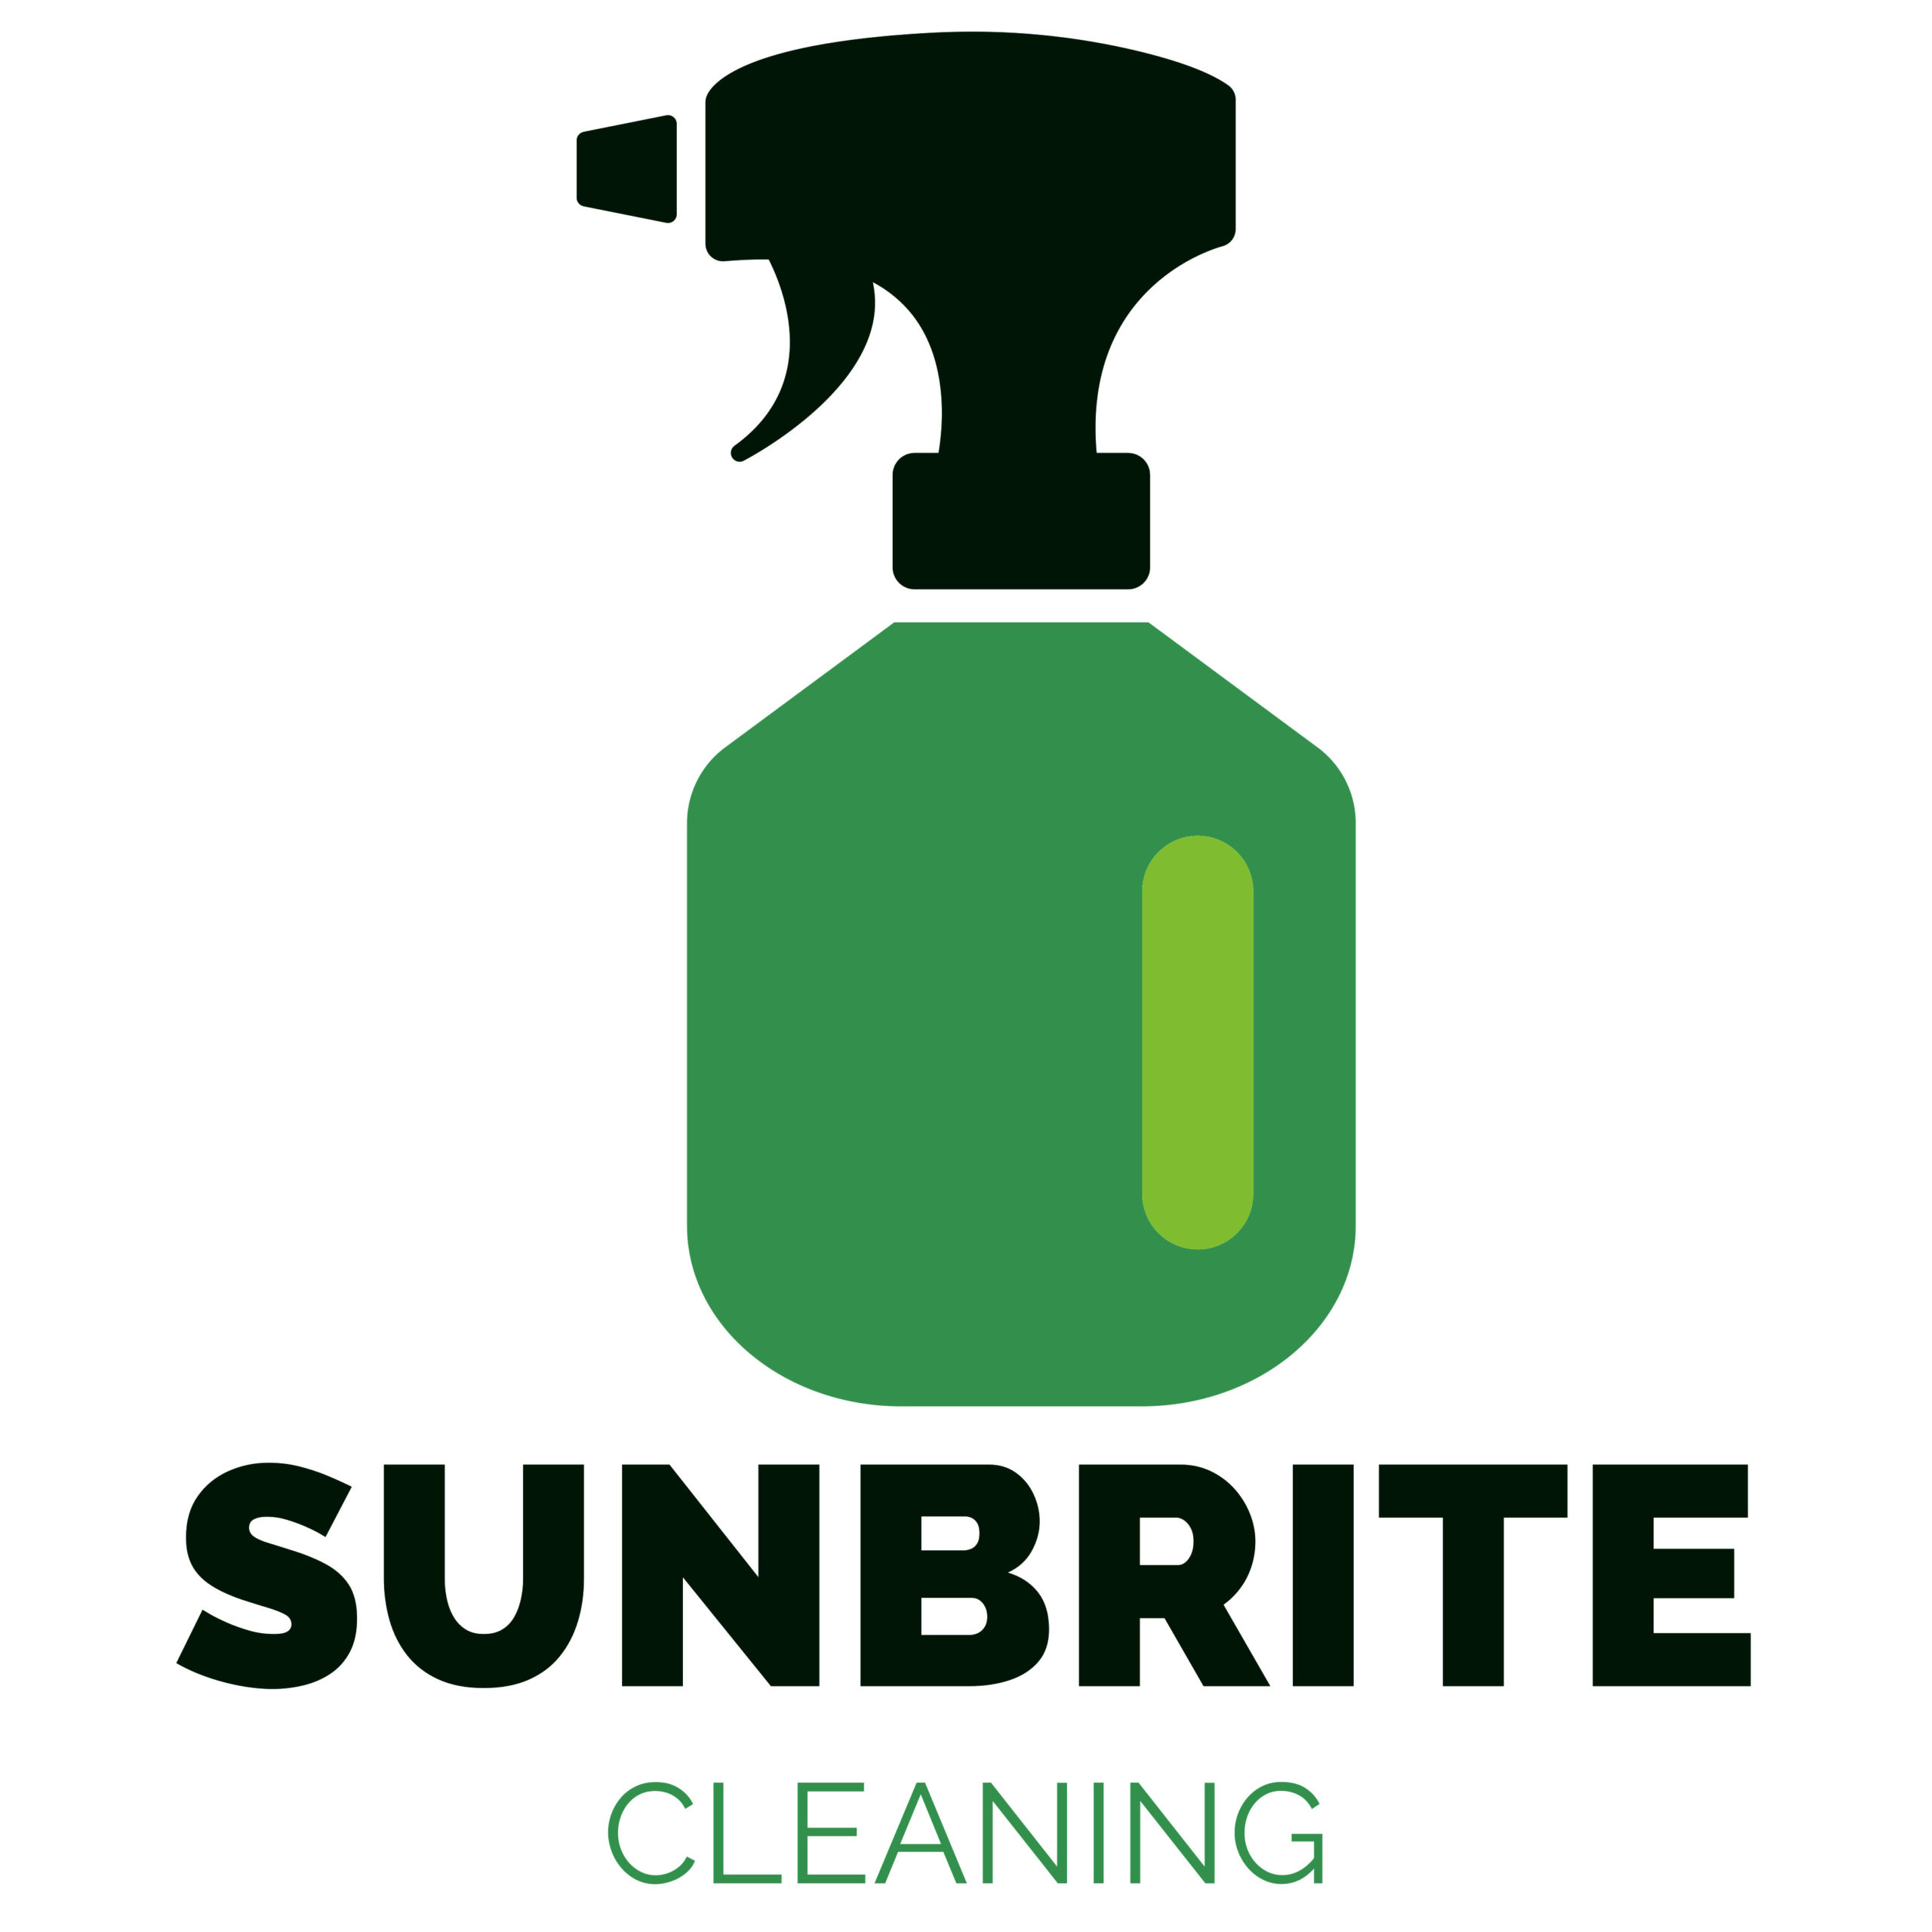 We Shine When You Sunbrite Cleaning